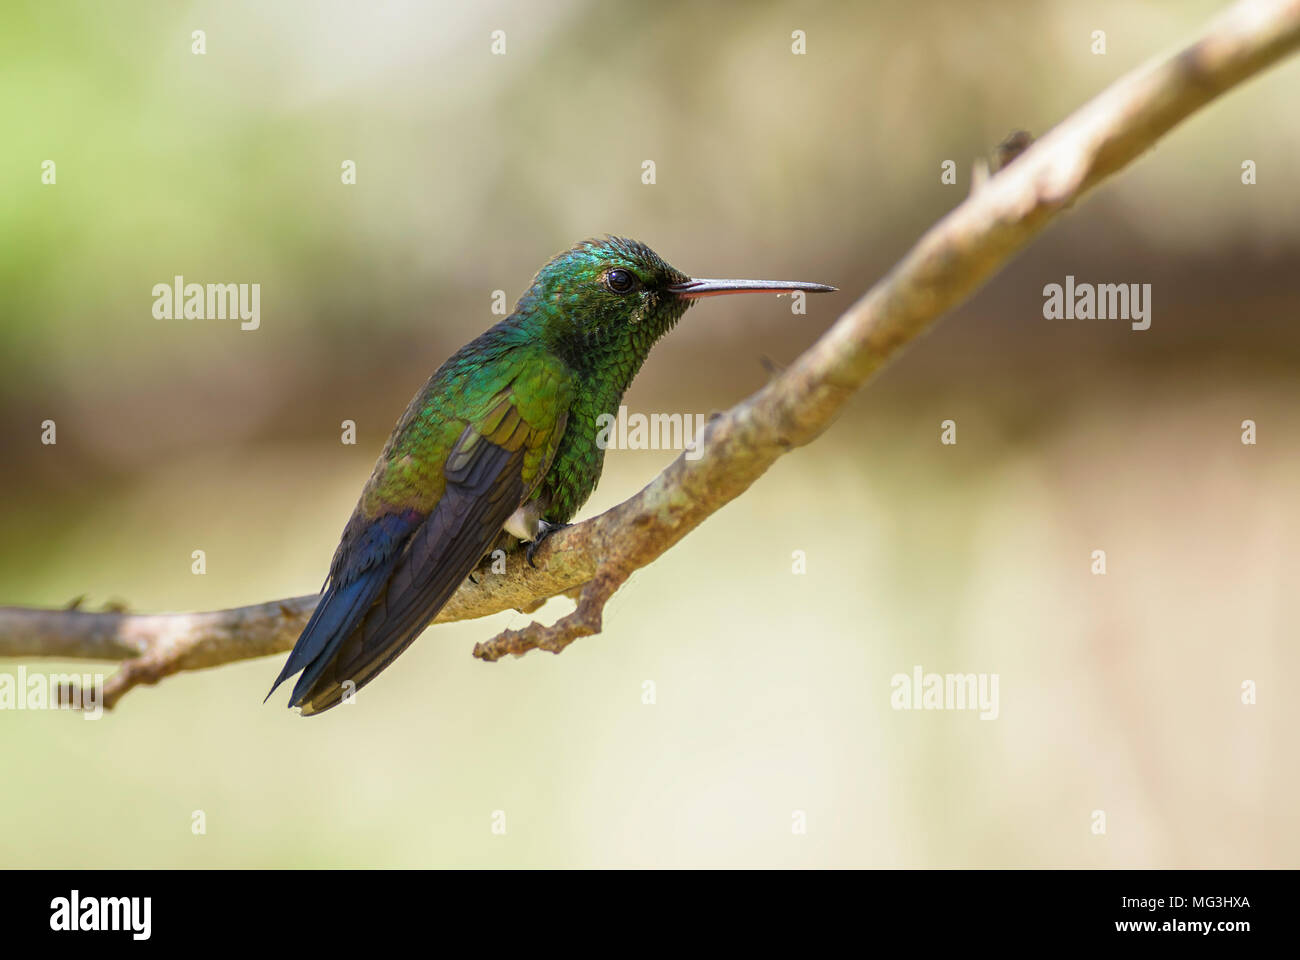 Fork-tailed Emerald - Chlorostilbon canivetii, beautiful green hummingbird from Central America forests, Costa Rica. Stock Photo